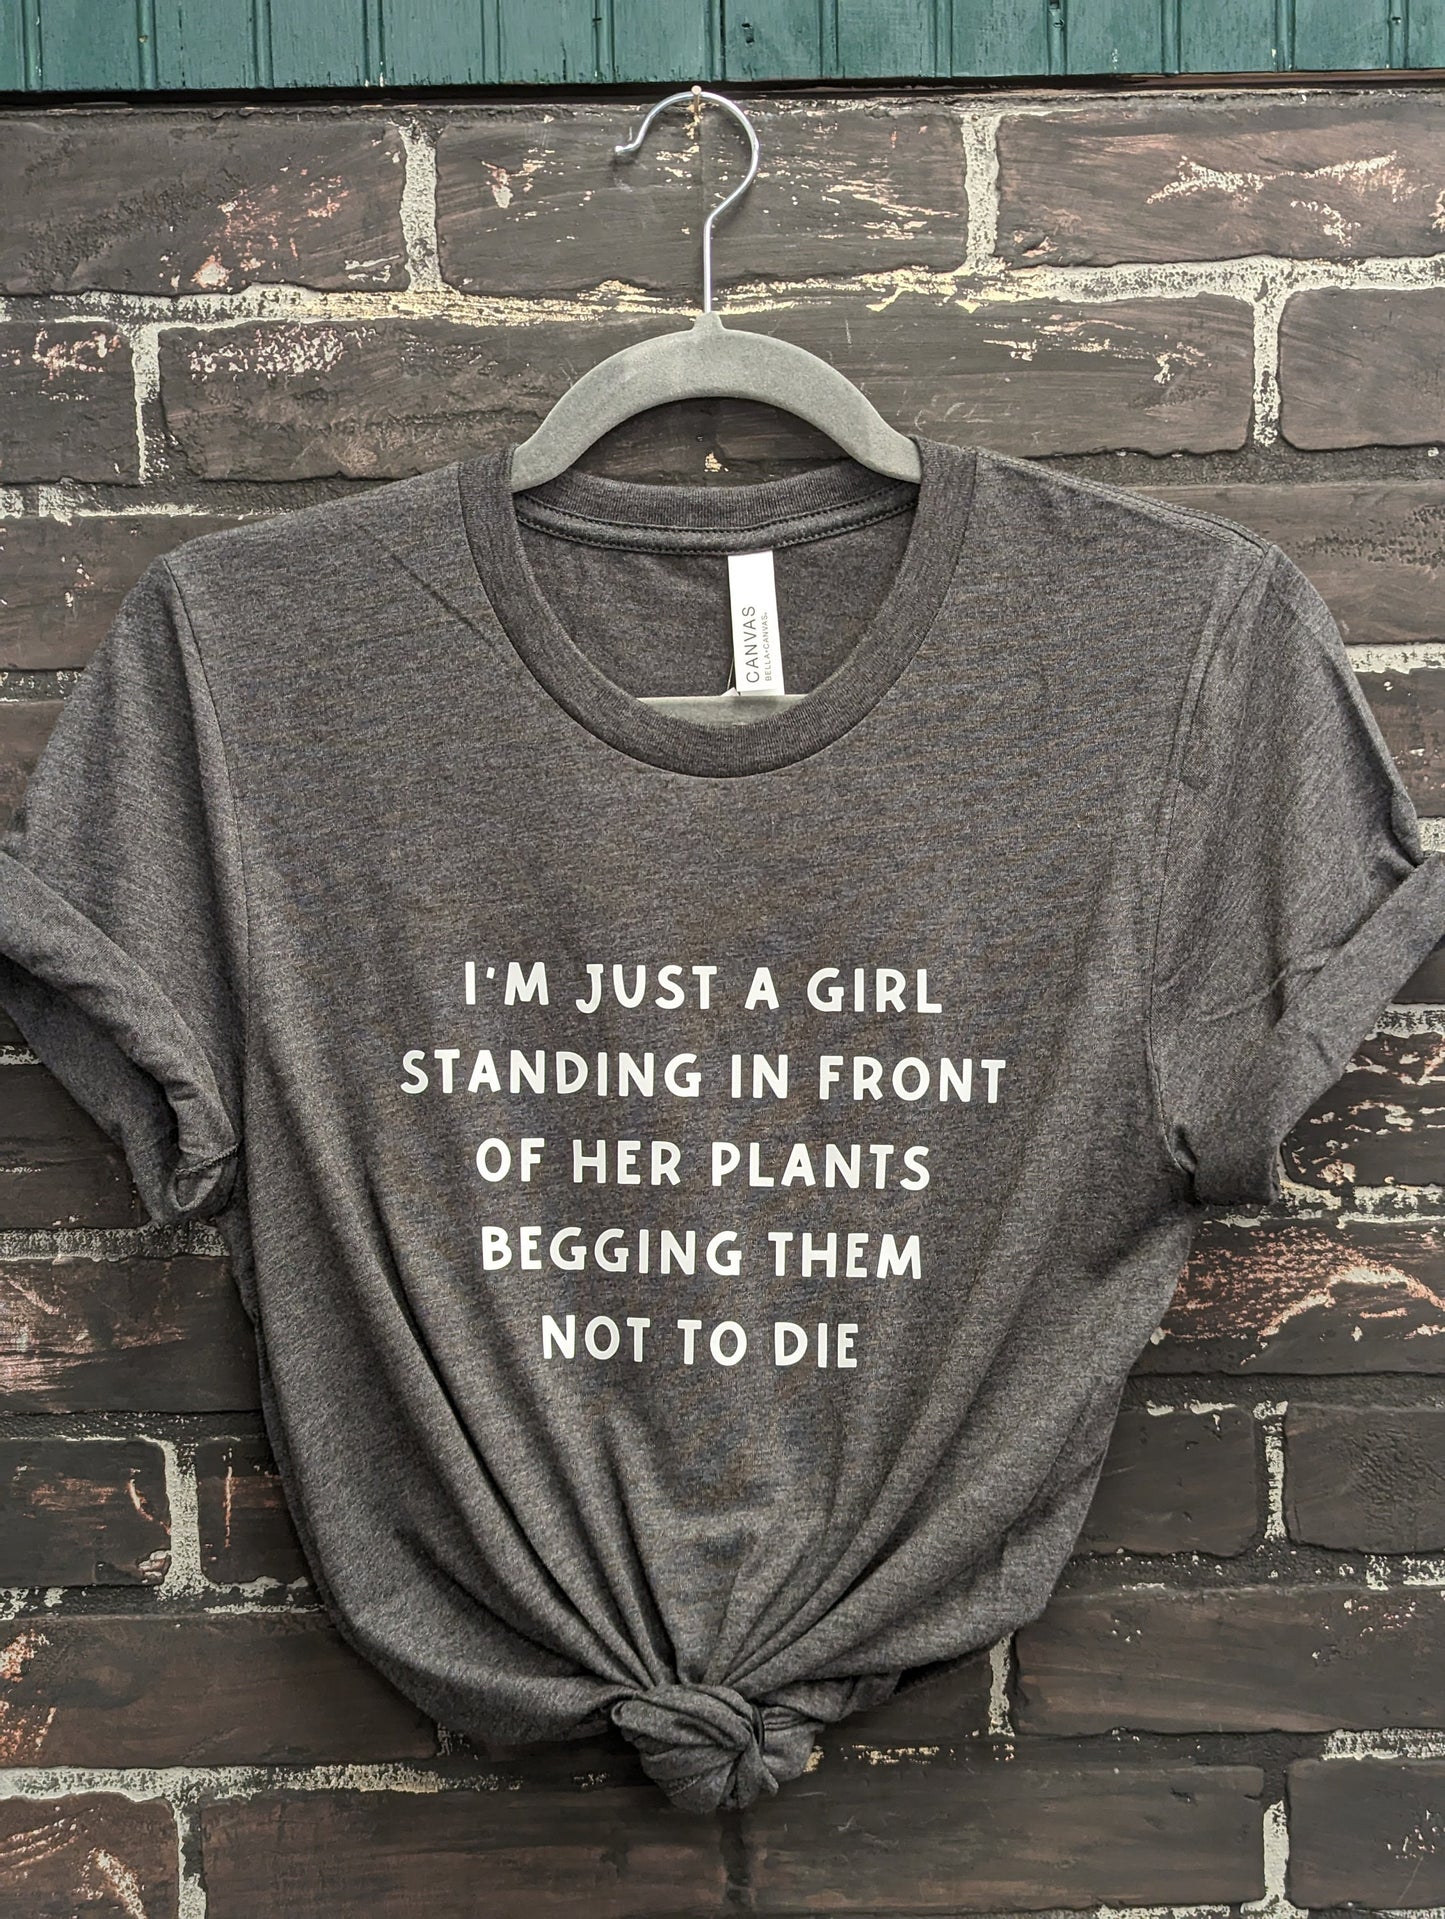 I'm just a girl standing in front of my plants begging them not to die, Dark Gray T-shirt